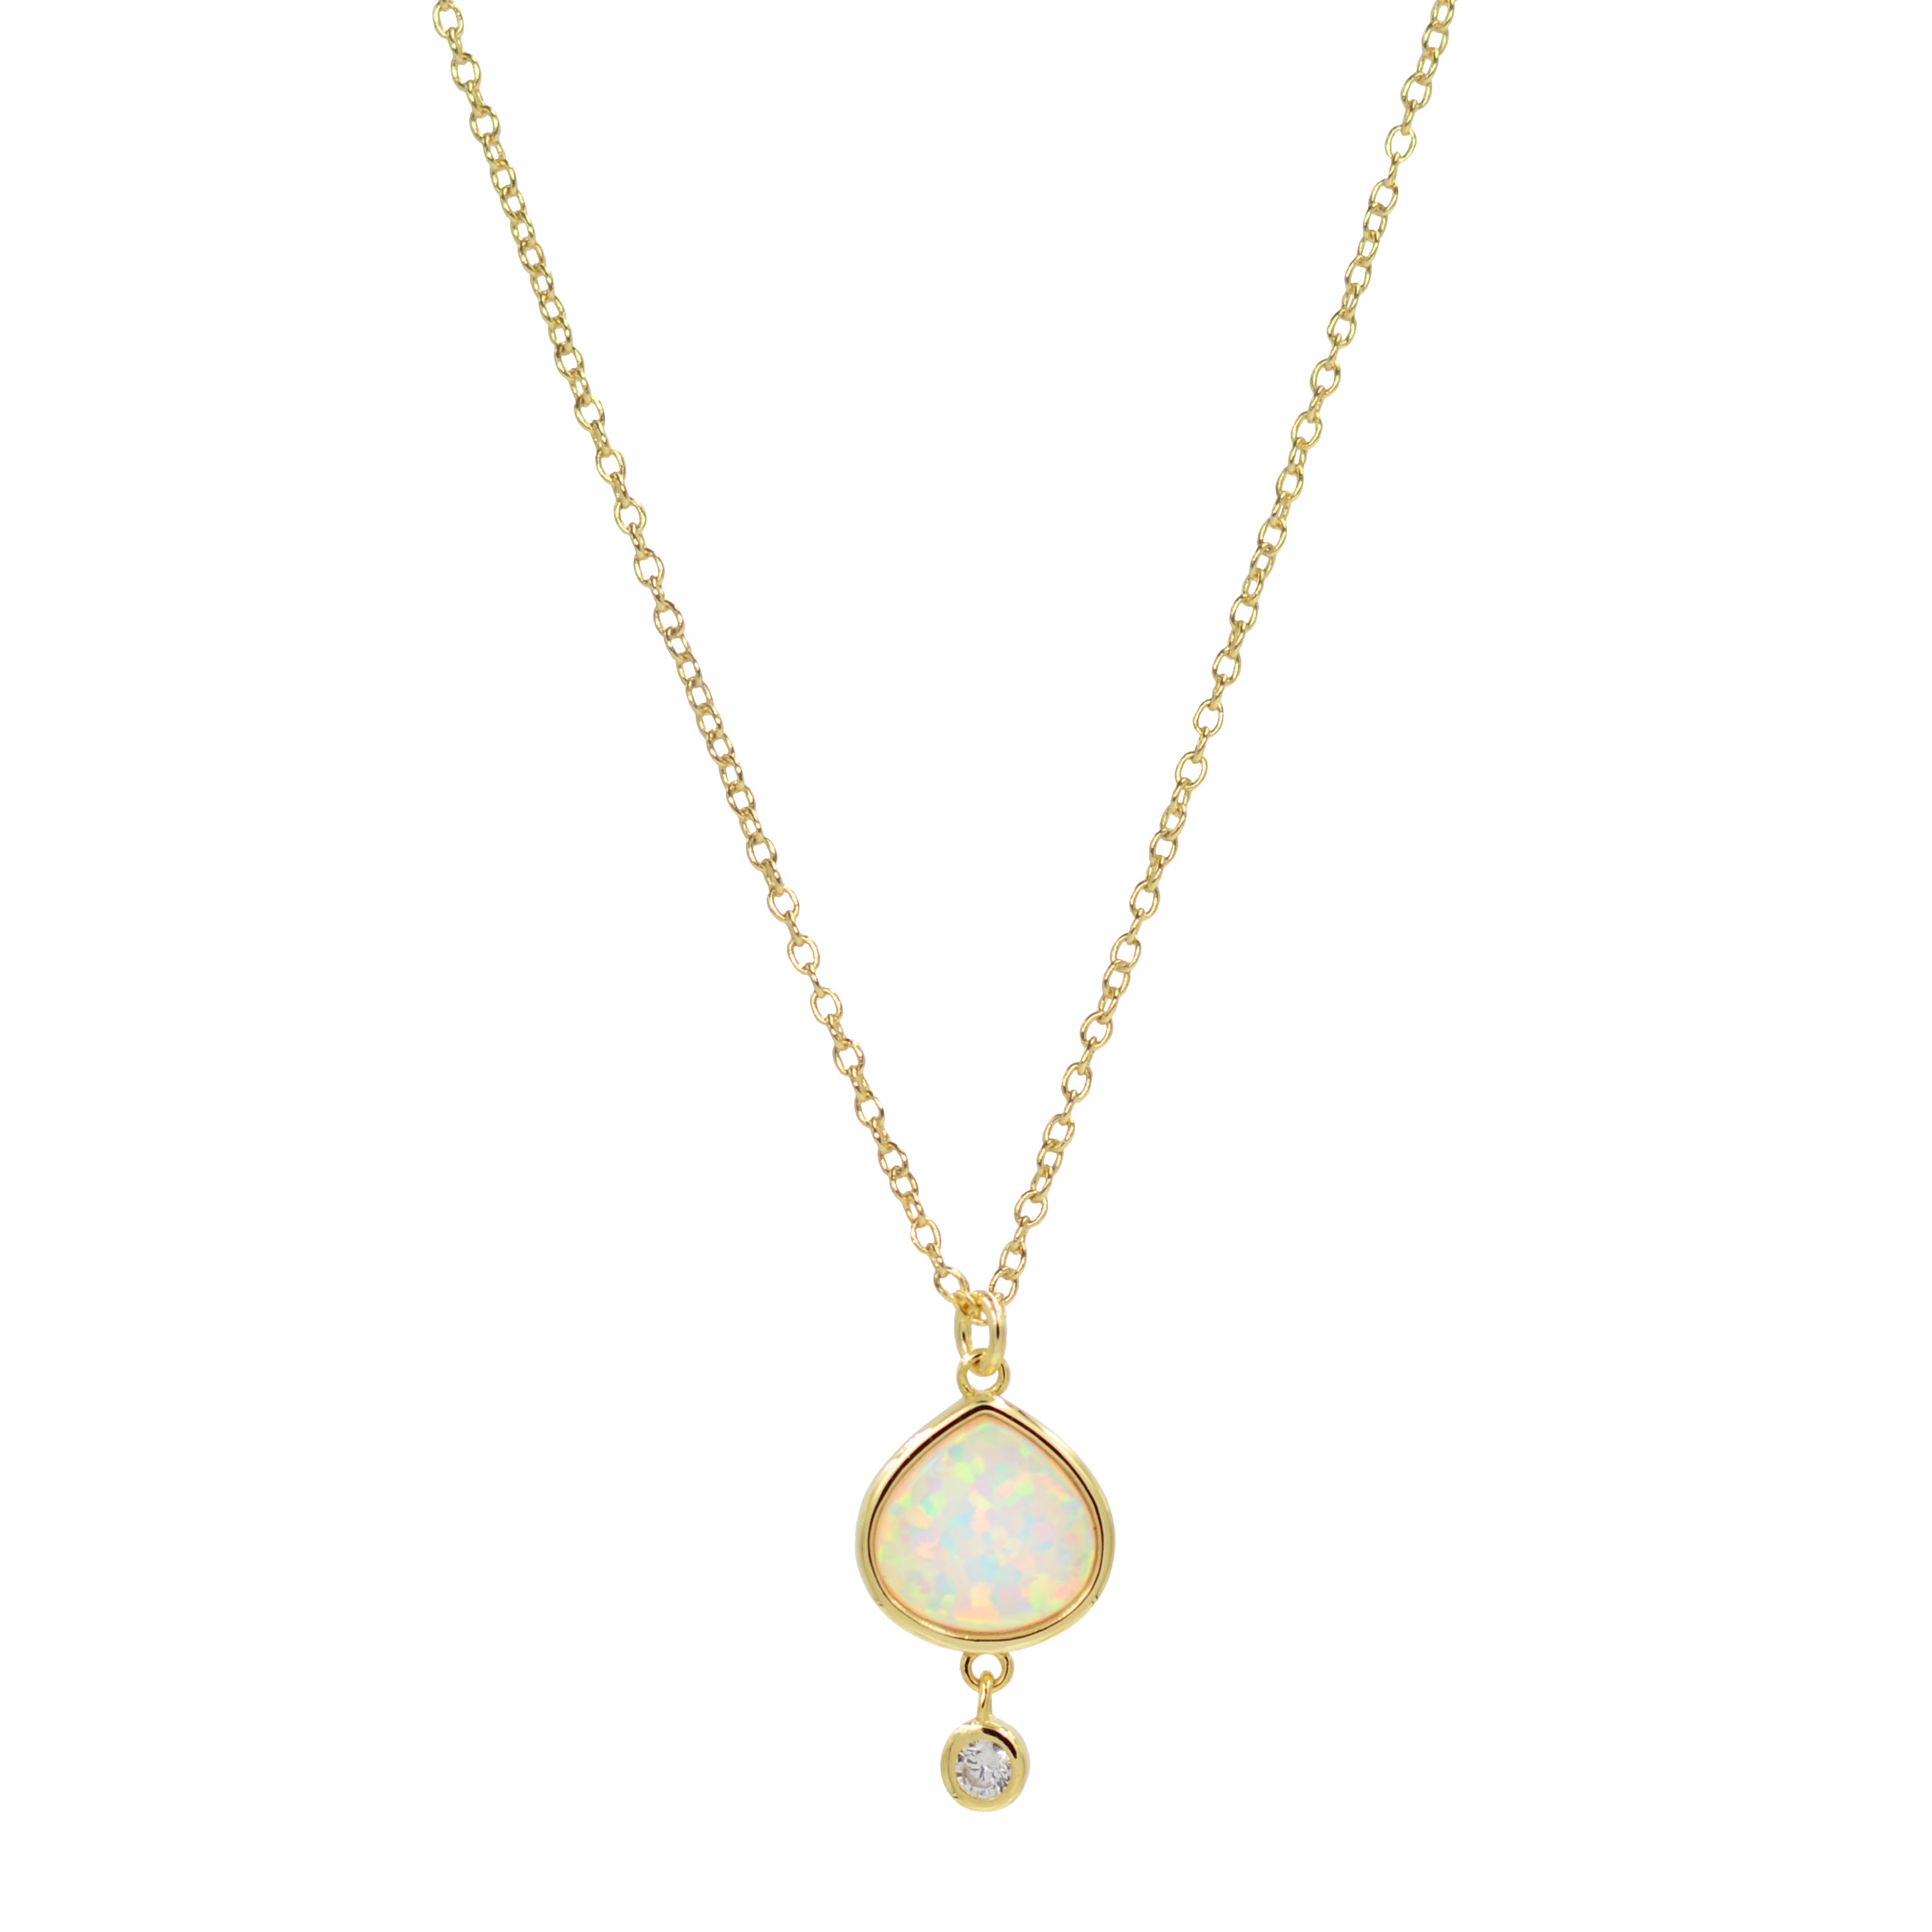 Best Friend - White Opal Pear Necklace With Crystal Drop - KAMARIA